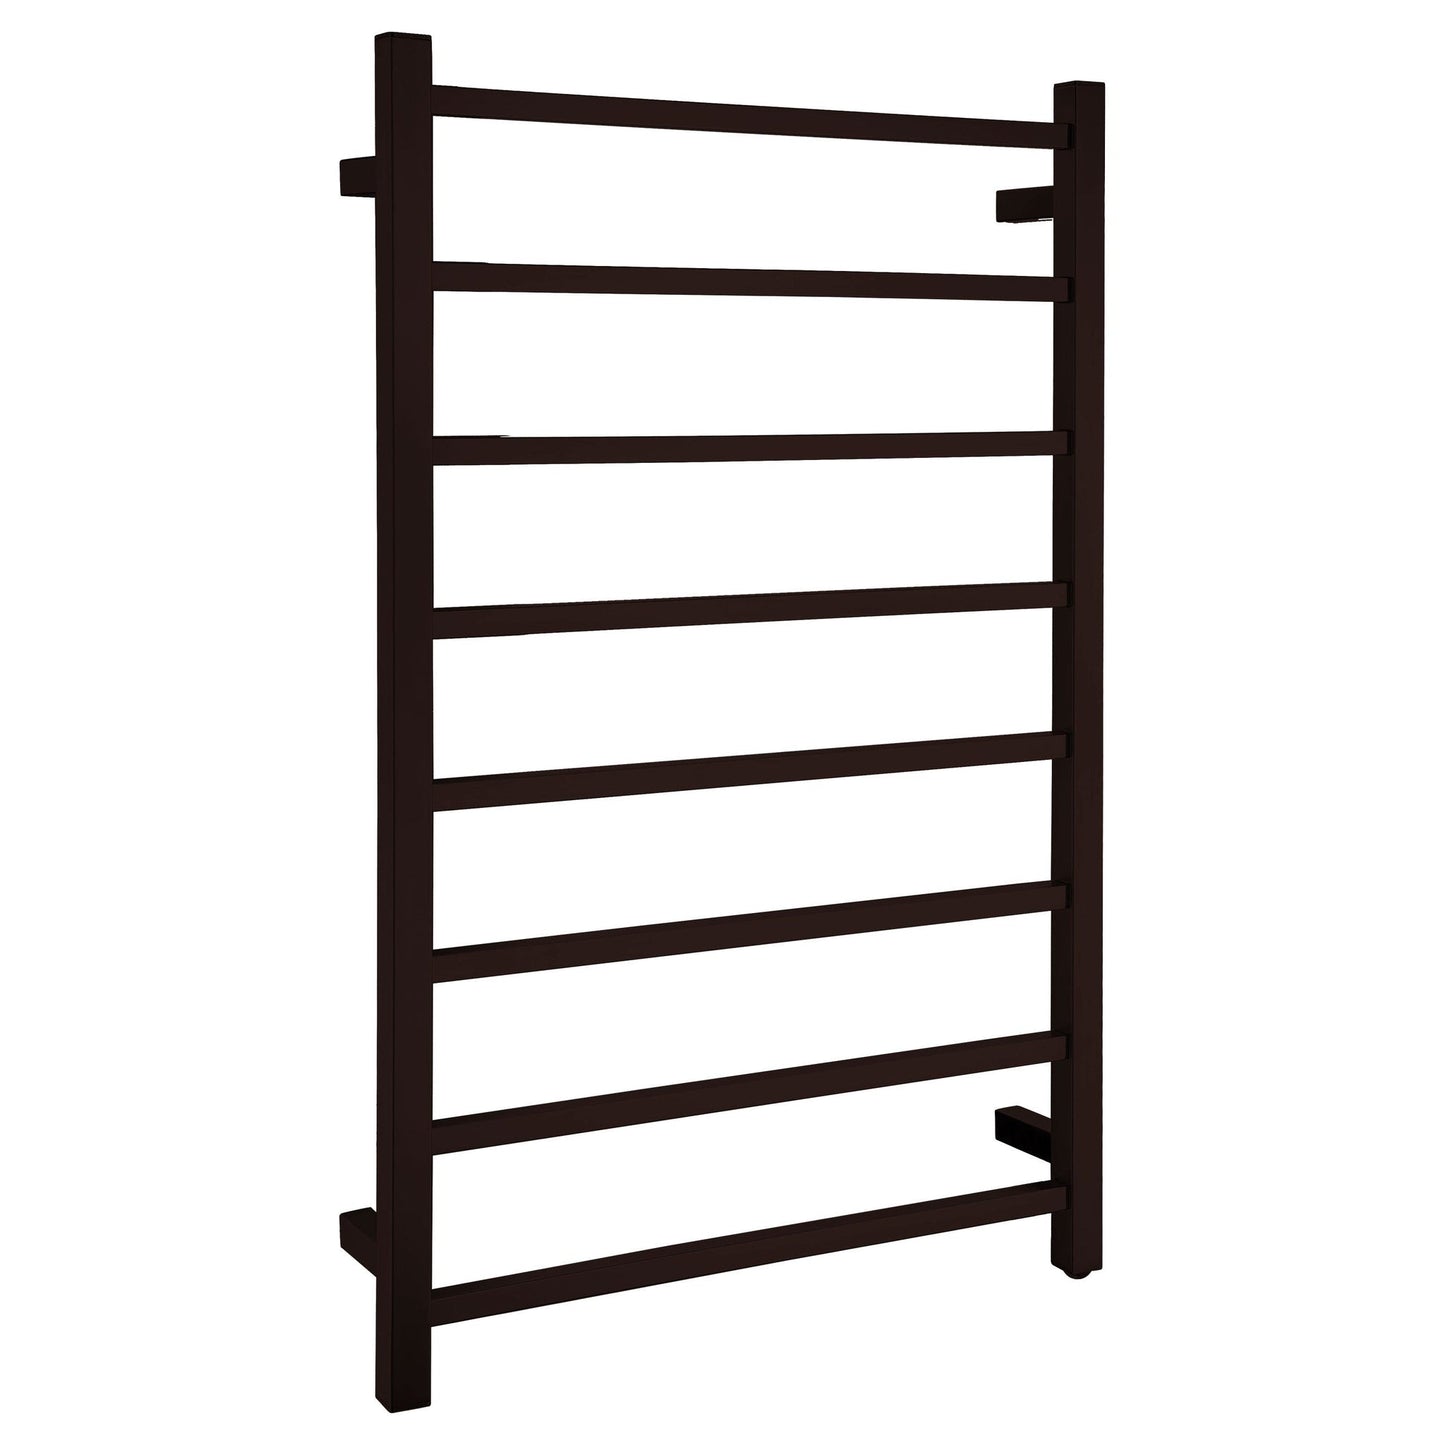 ANZZI Bell Series 8-Bar Oil Rubbed Bronze Wall-Mounted Electric Towel Warmer Stainless Steel Rack